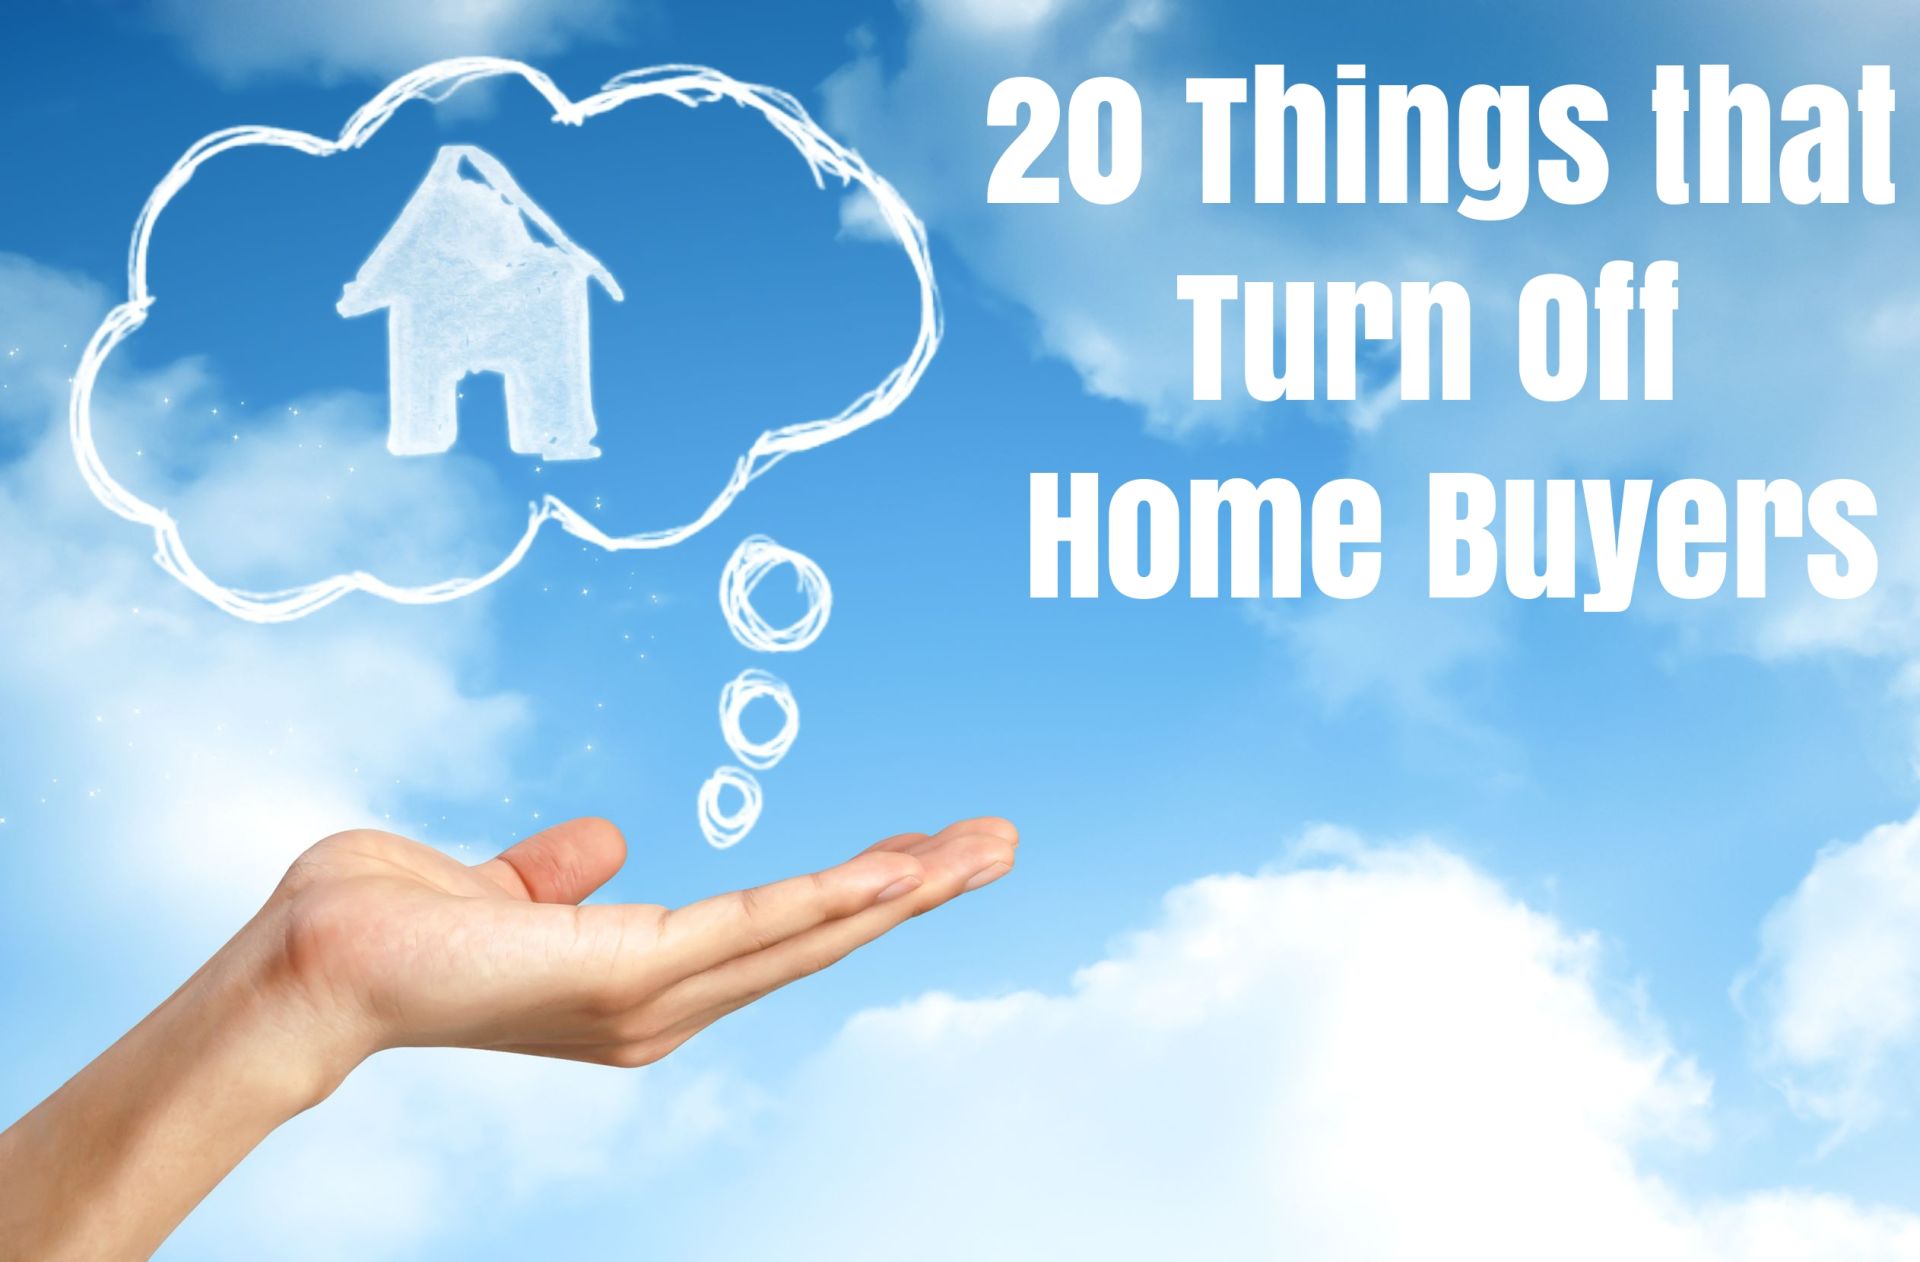 20 Things That Turn Off Home Buyers